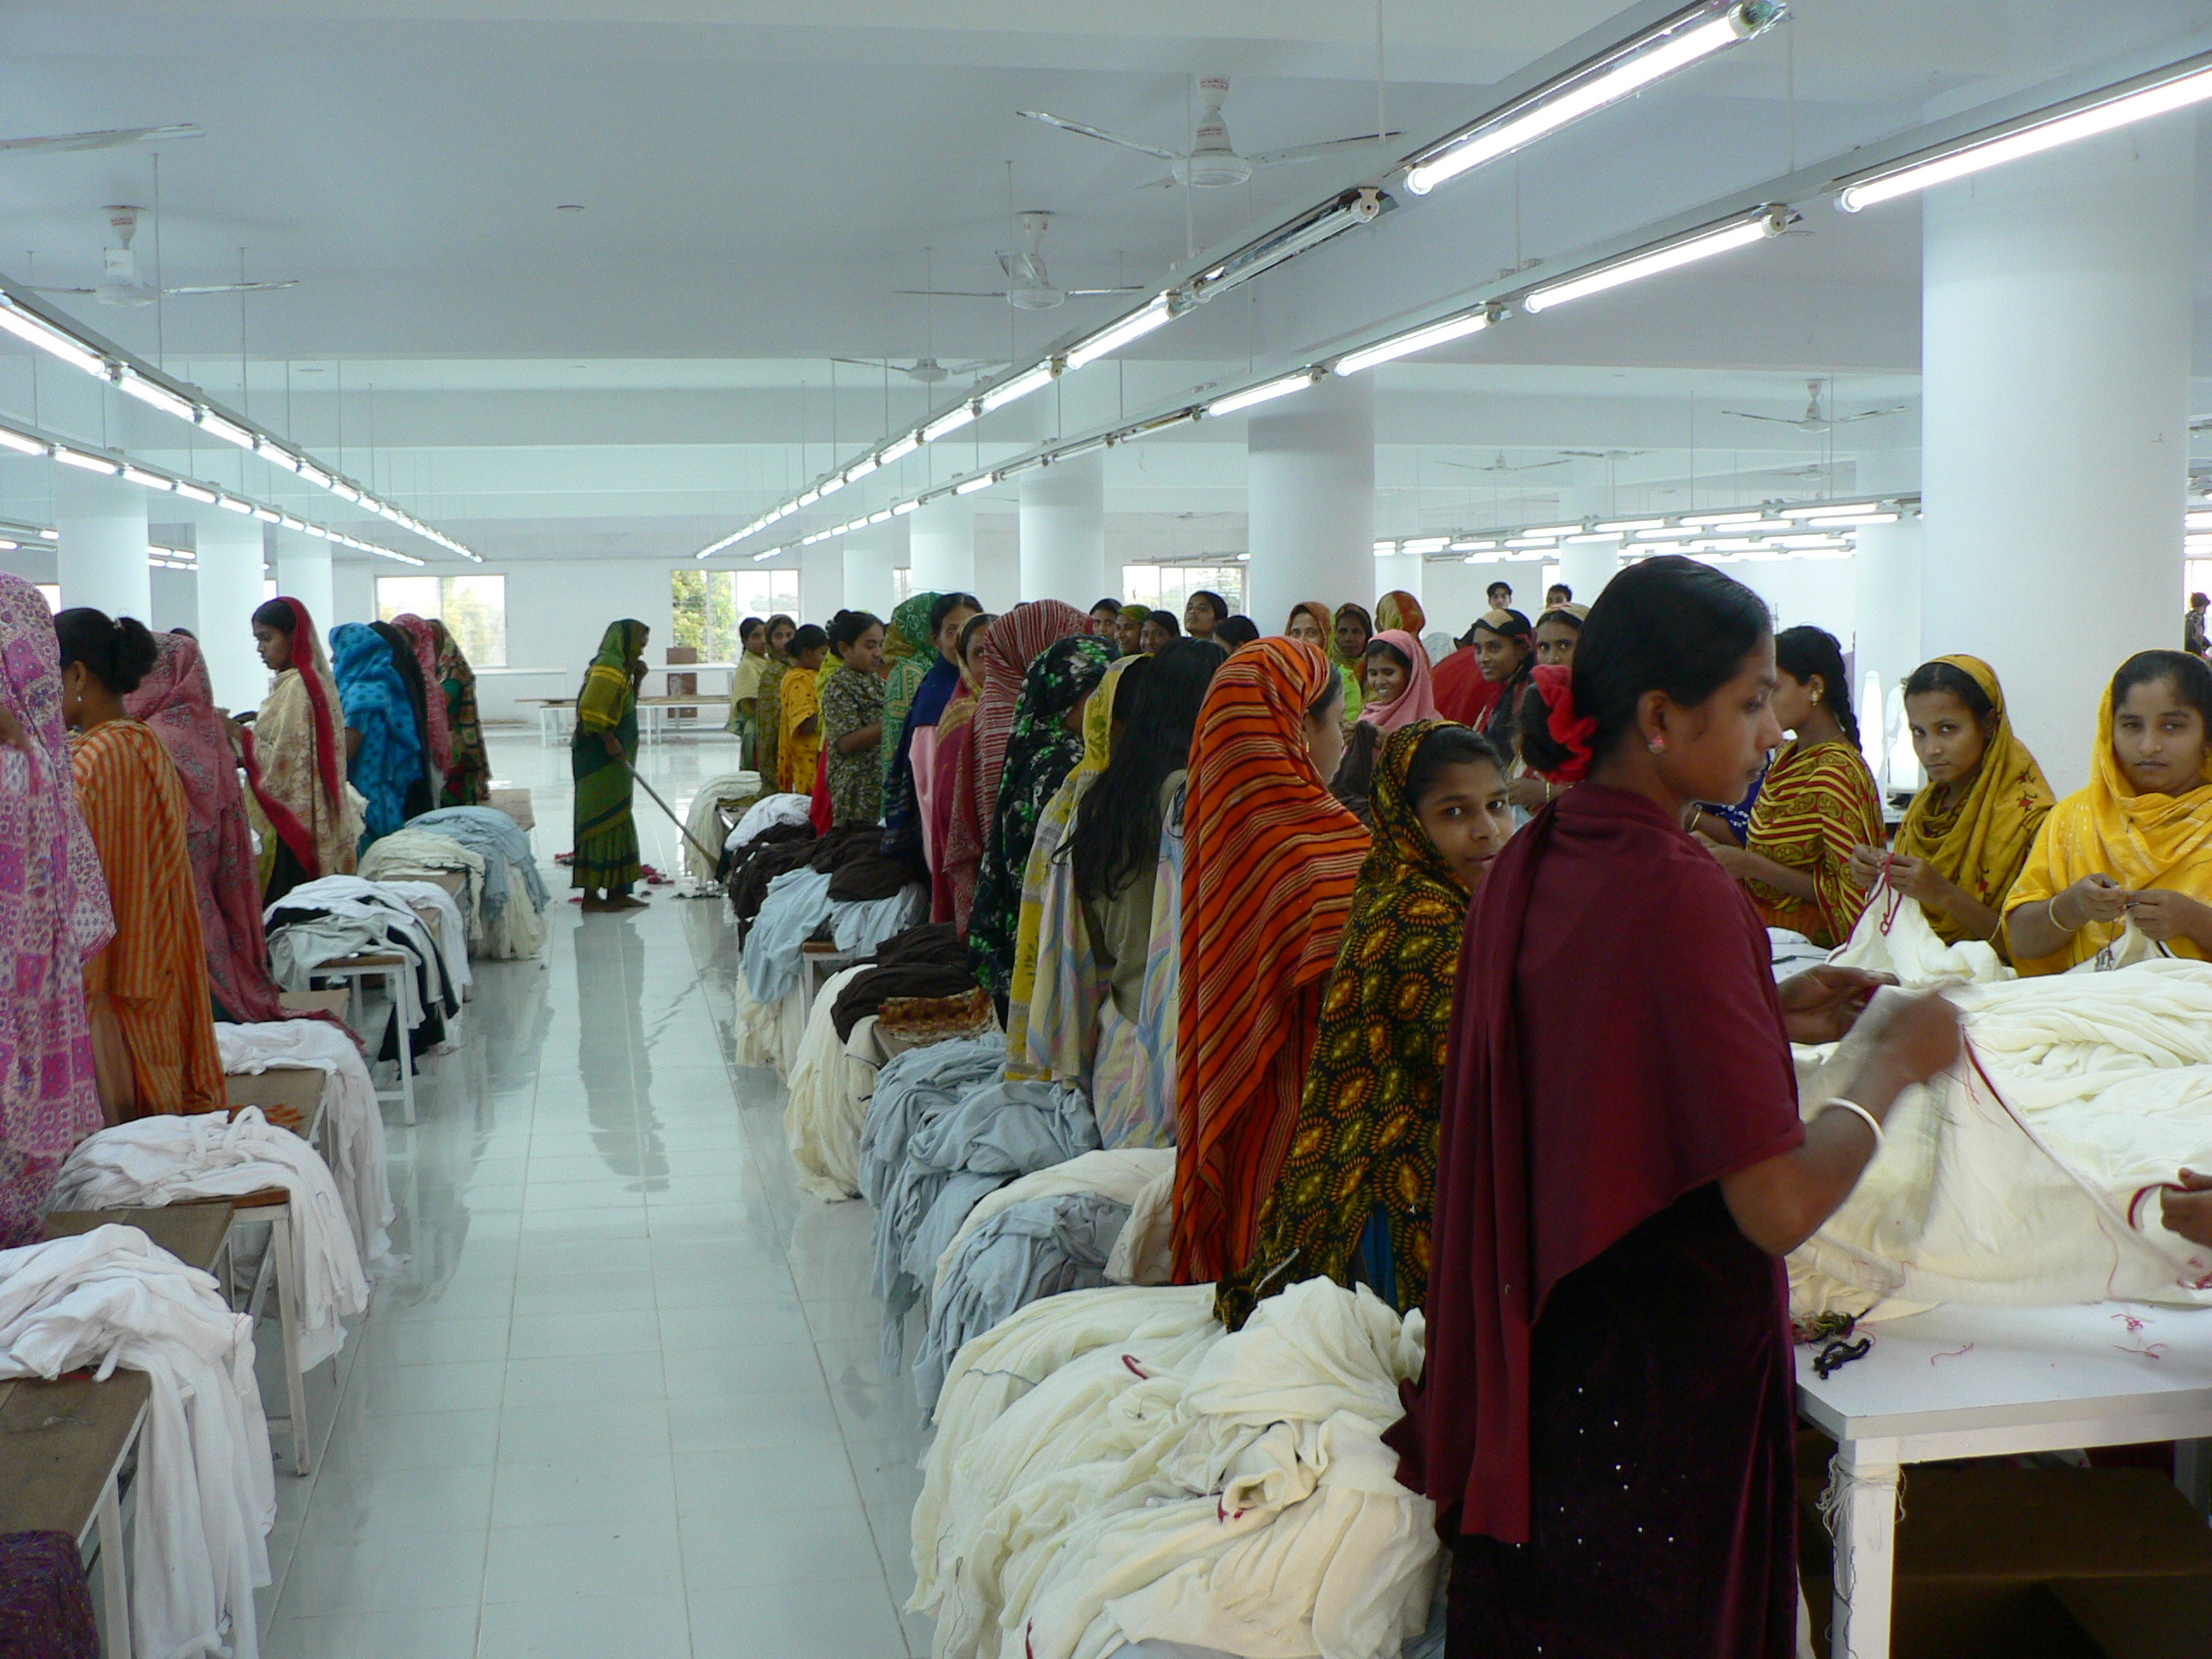 Garment workers at work